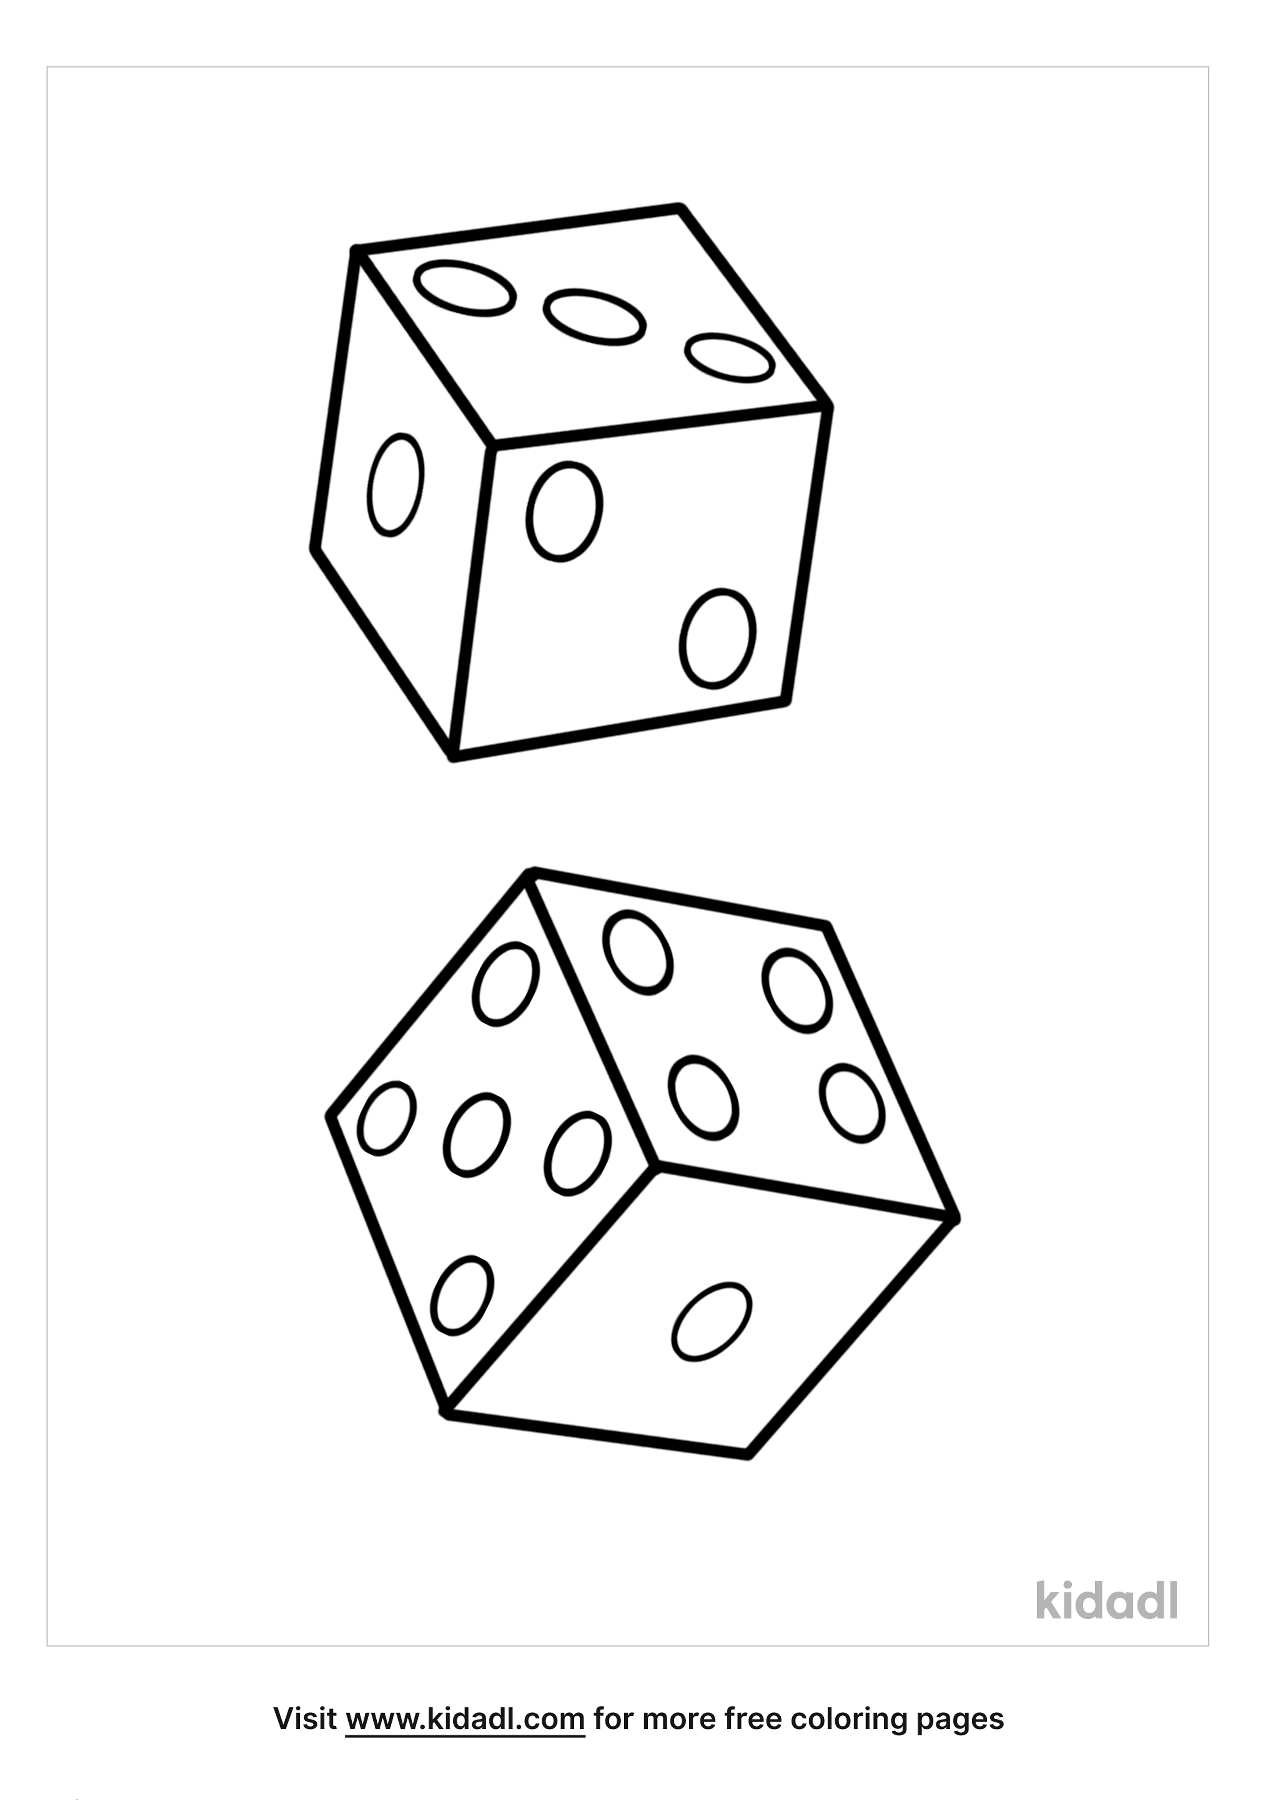 Dice Coloring Pages | Free Toys Coloring Pages | Kidadl